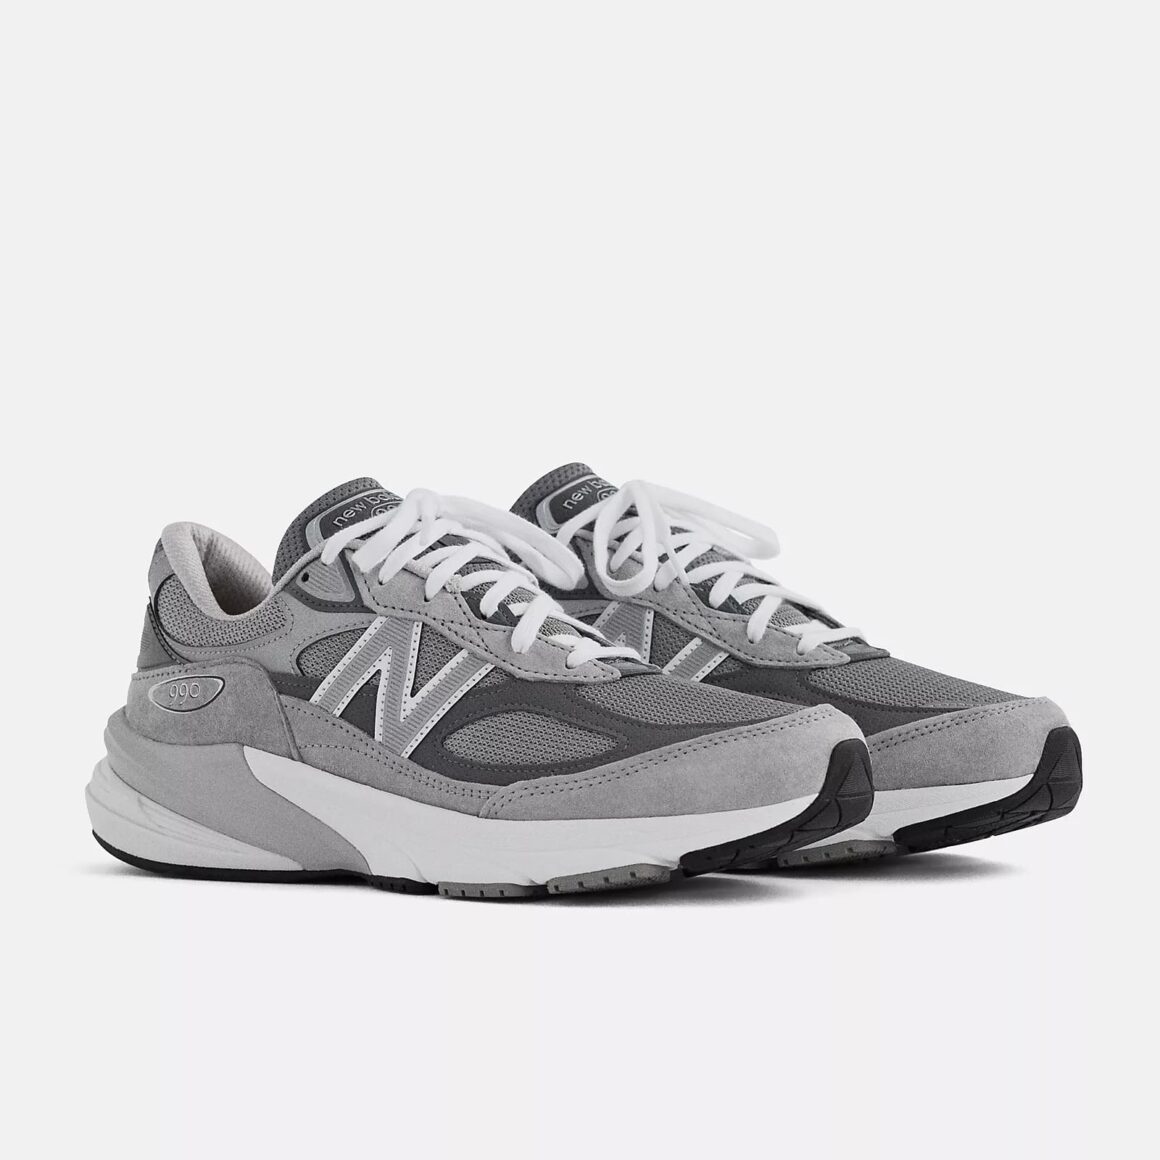 New Balance 990v6 M990GL6 Made in USA Lateral